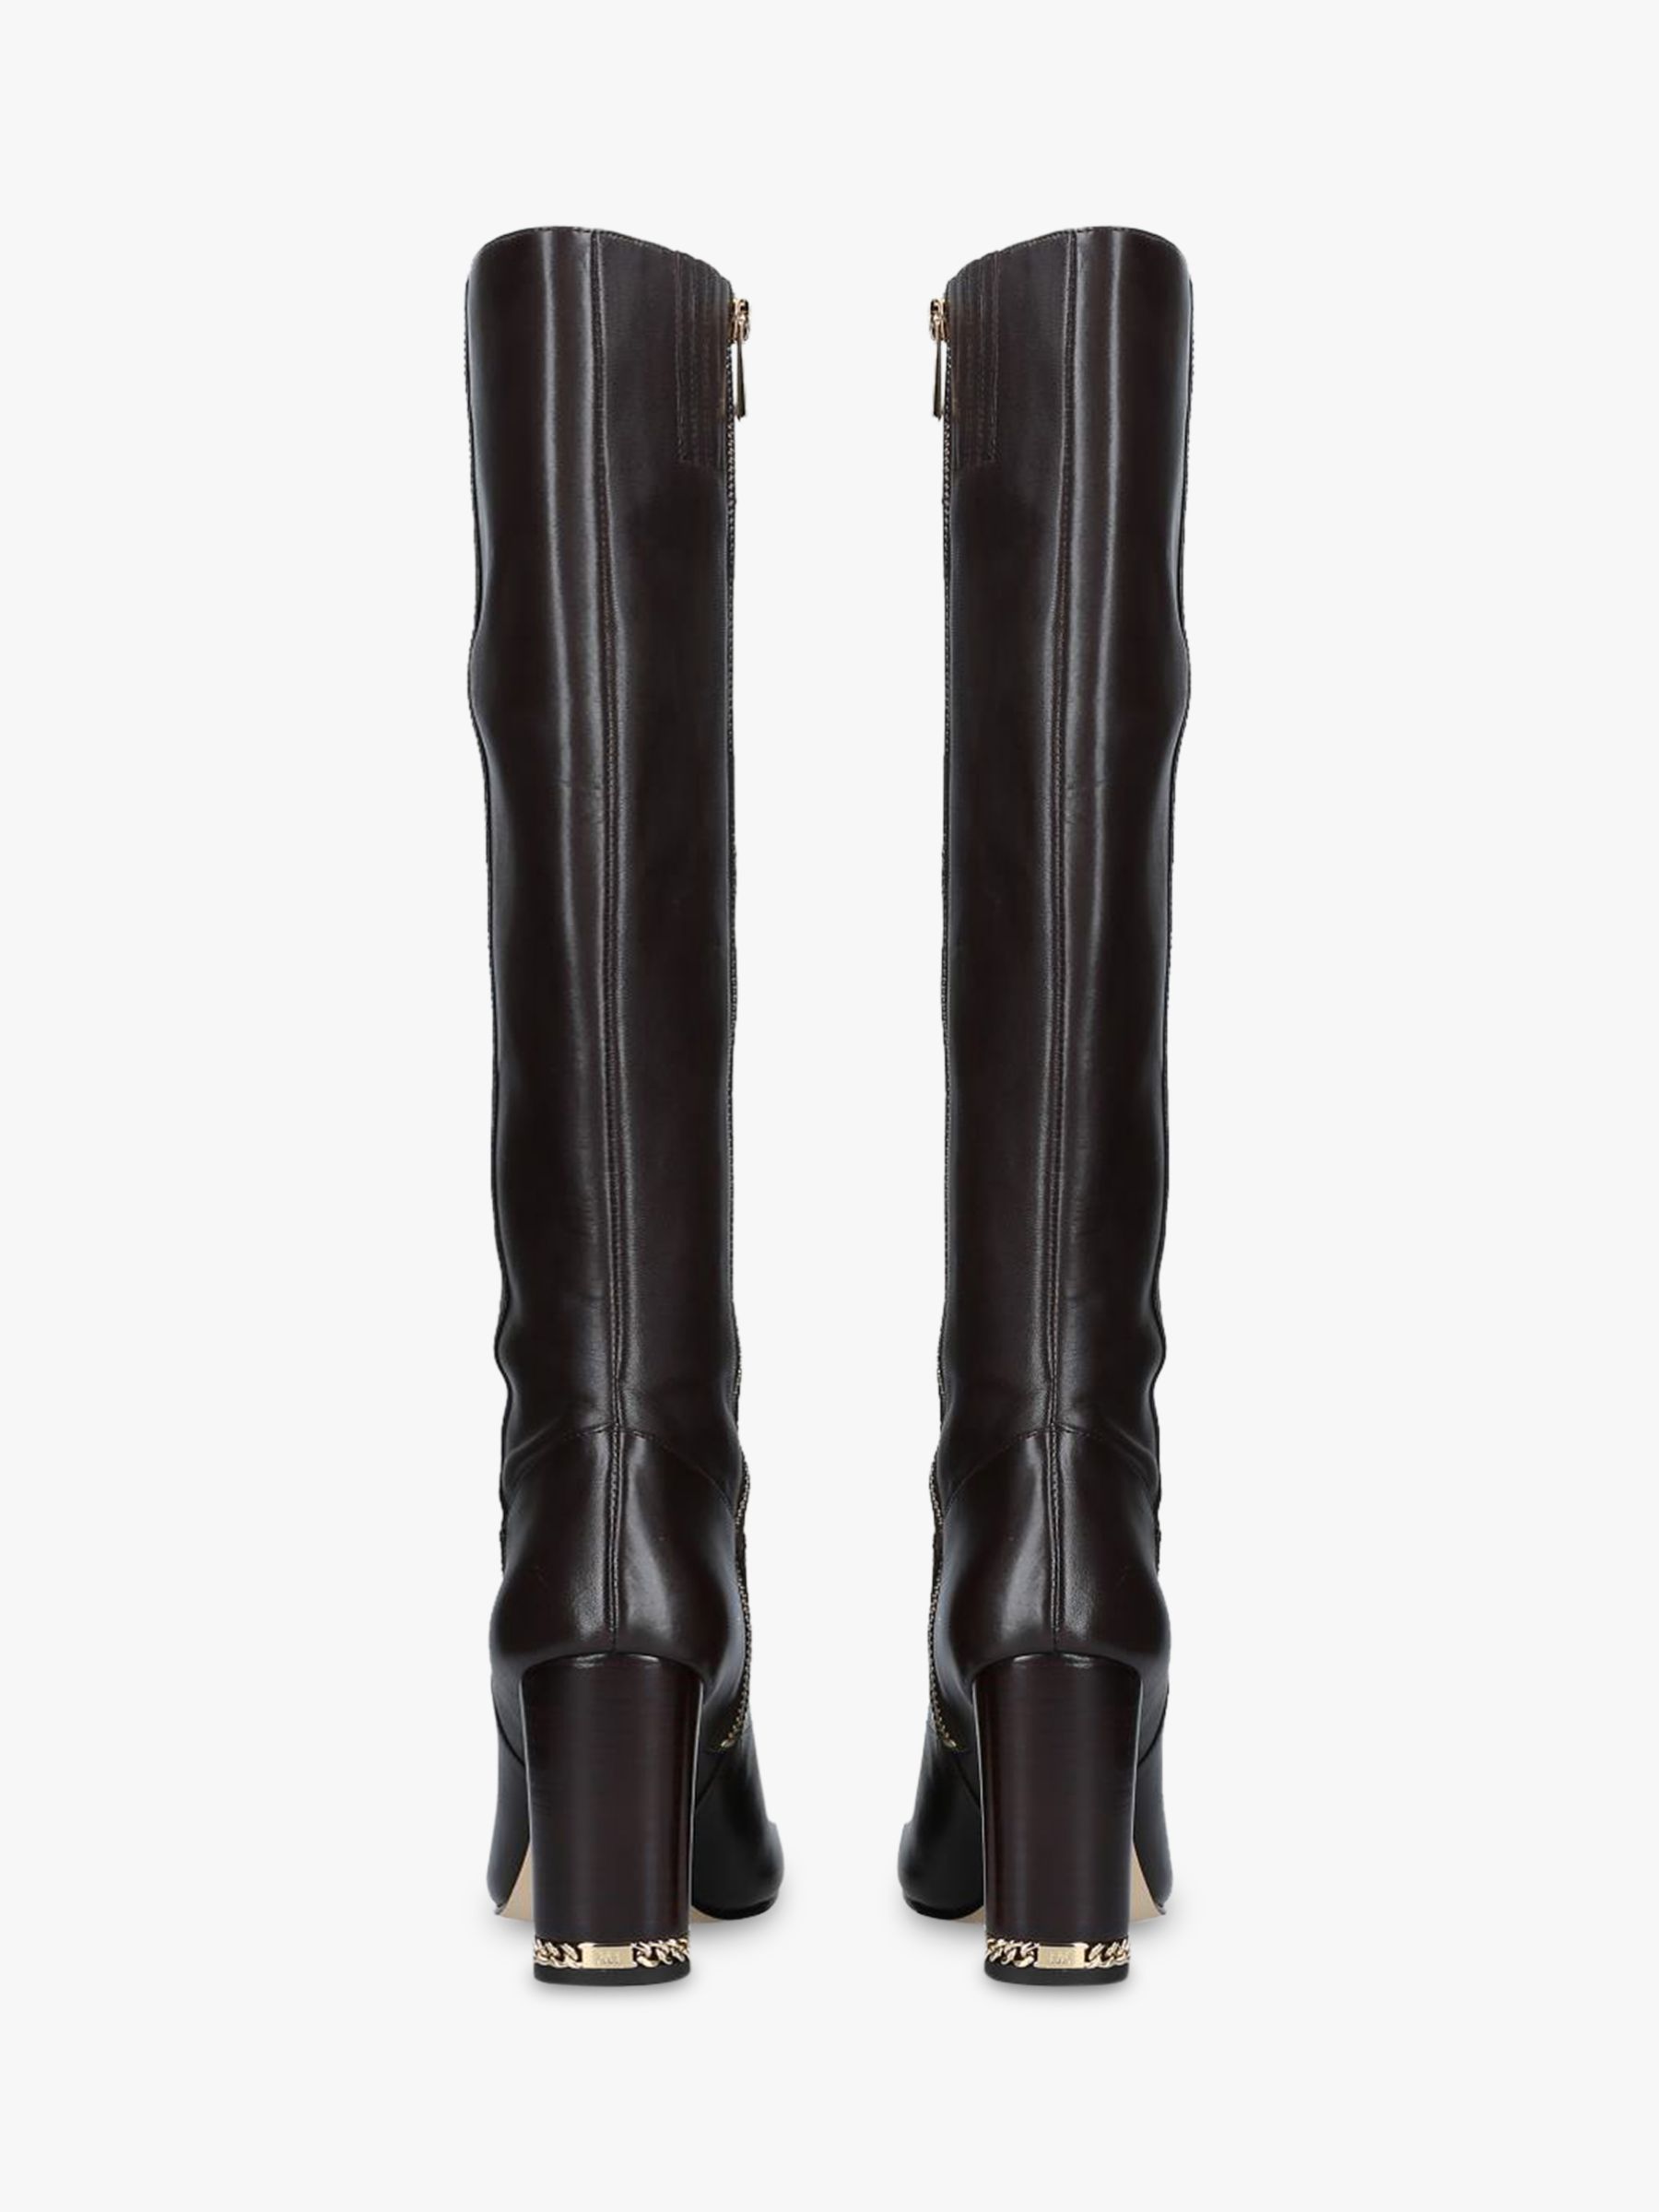 michael kors boots black and brown